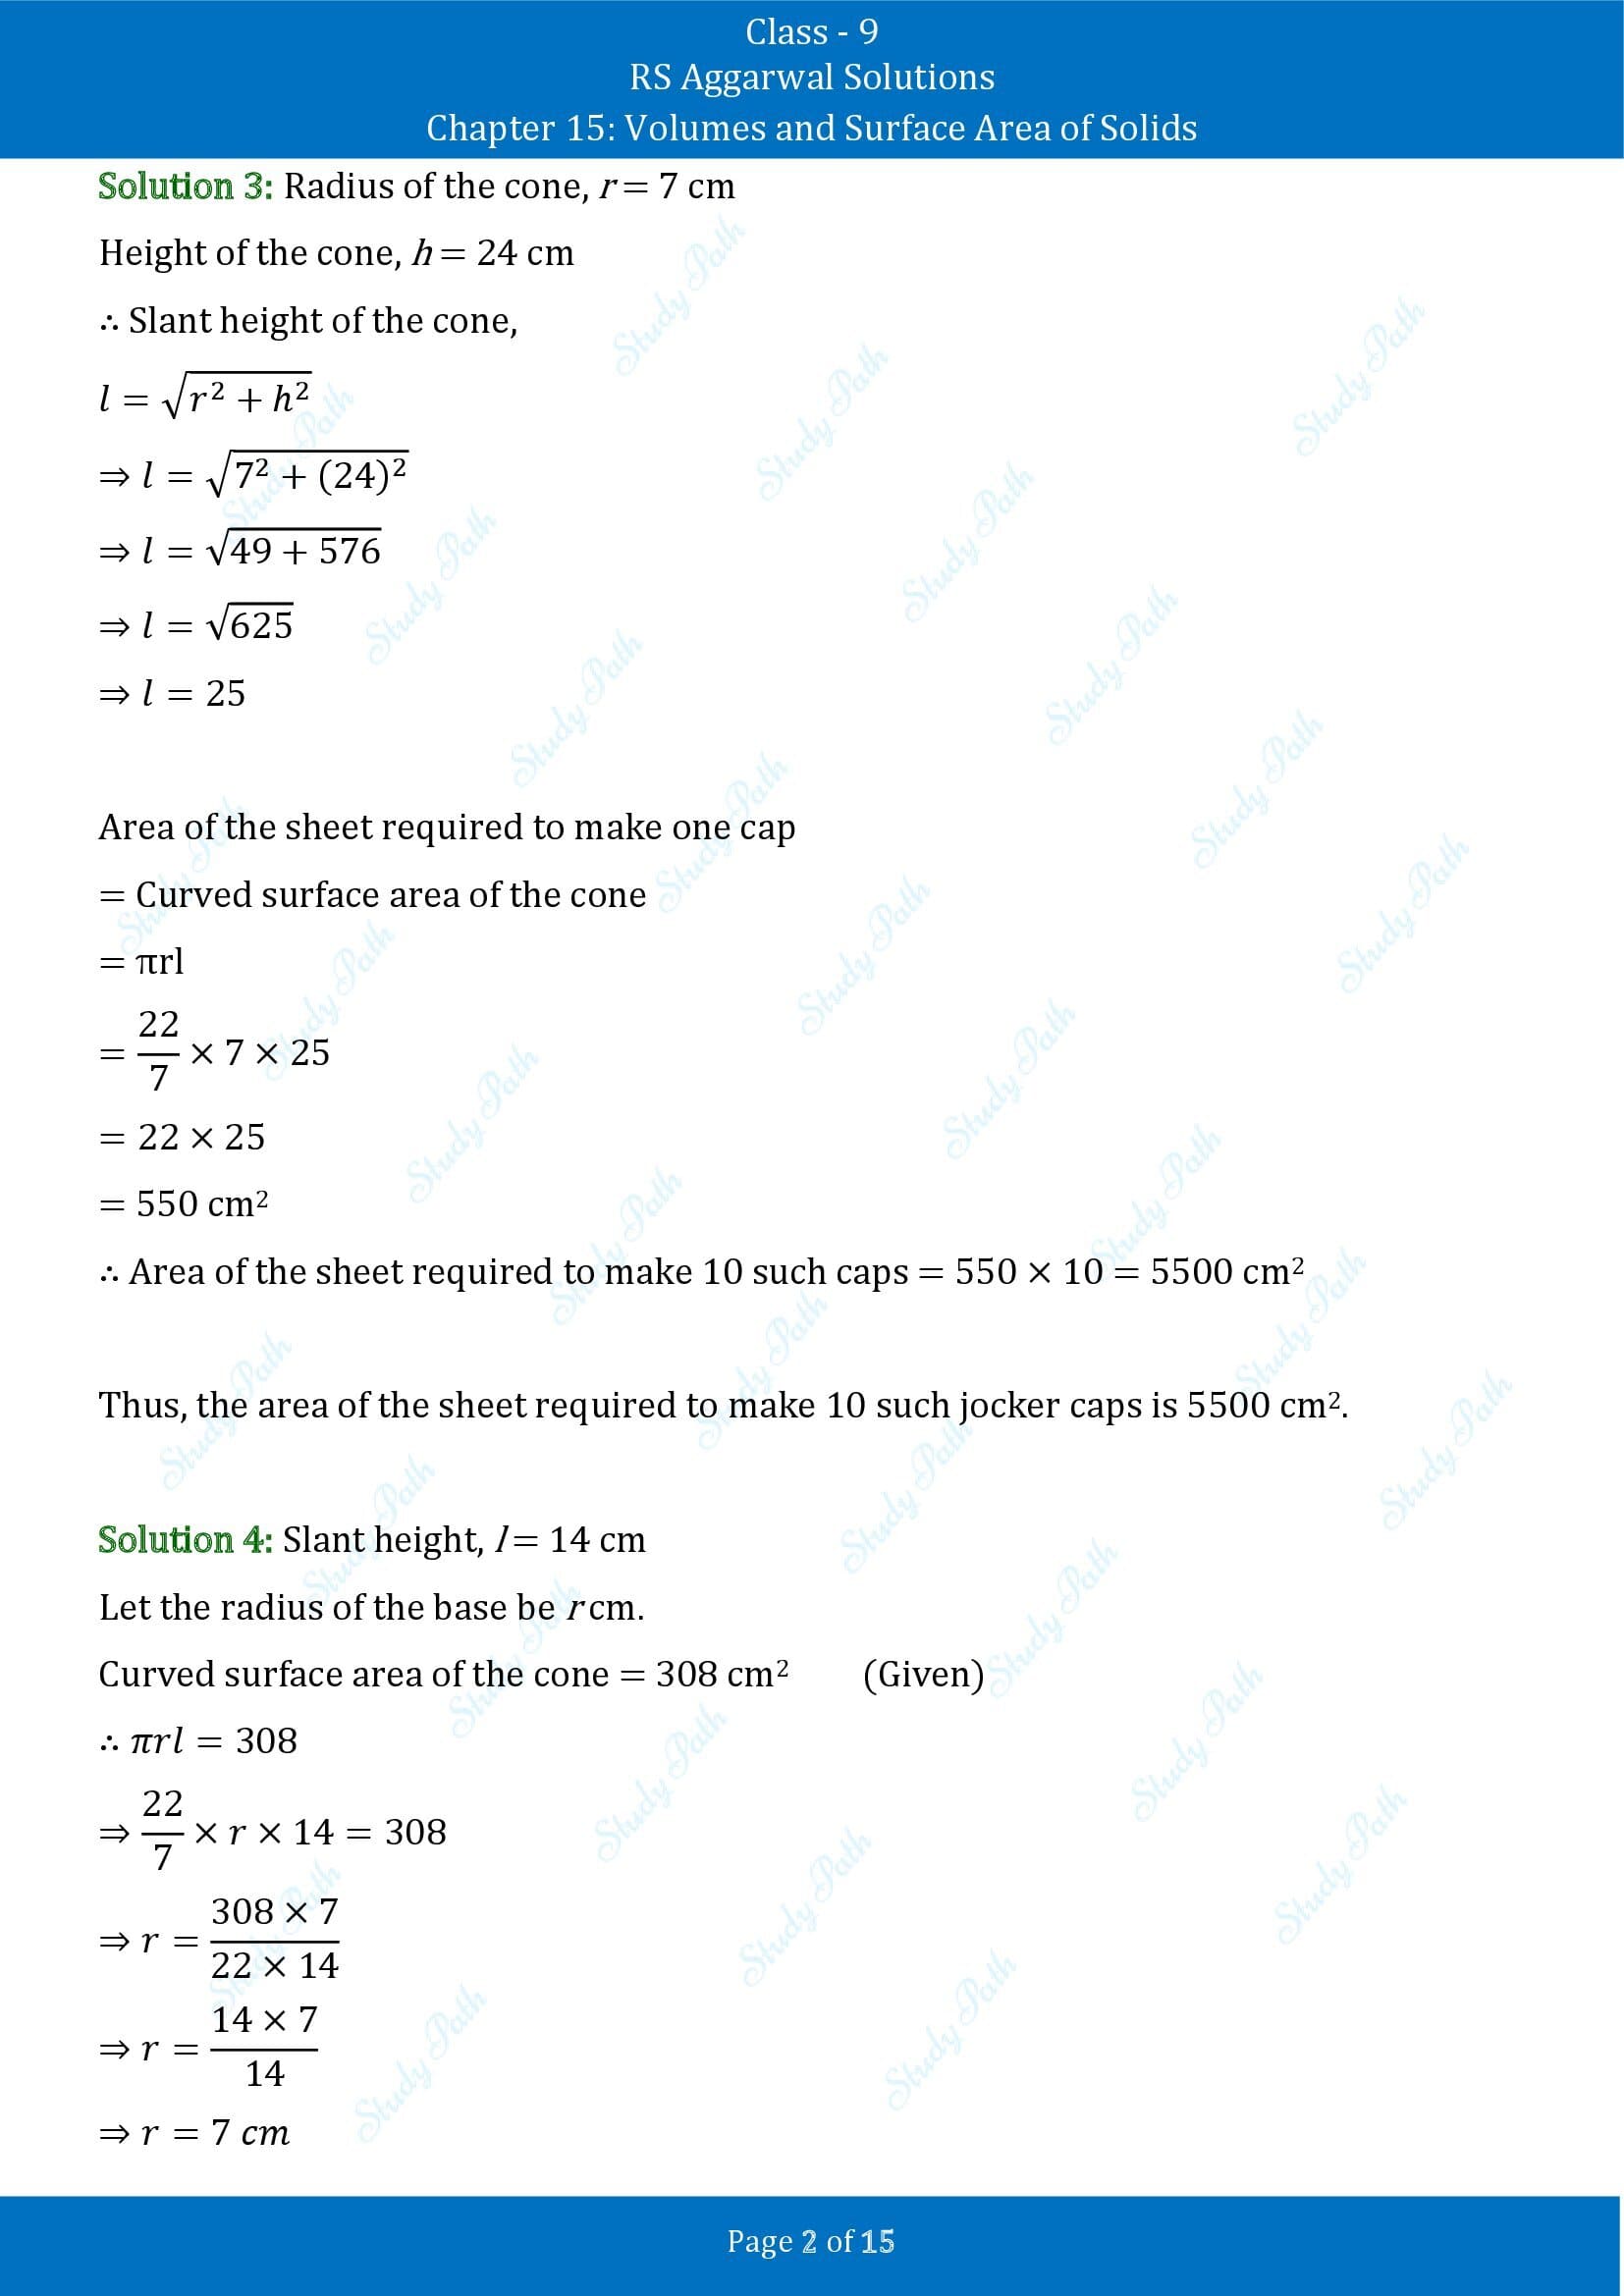 RS Aggarwal Solutions Class 9 Chapter 15 Volumes and Surface Area of Solids Exercise 15C 00002